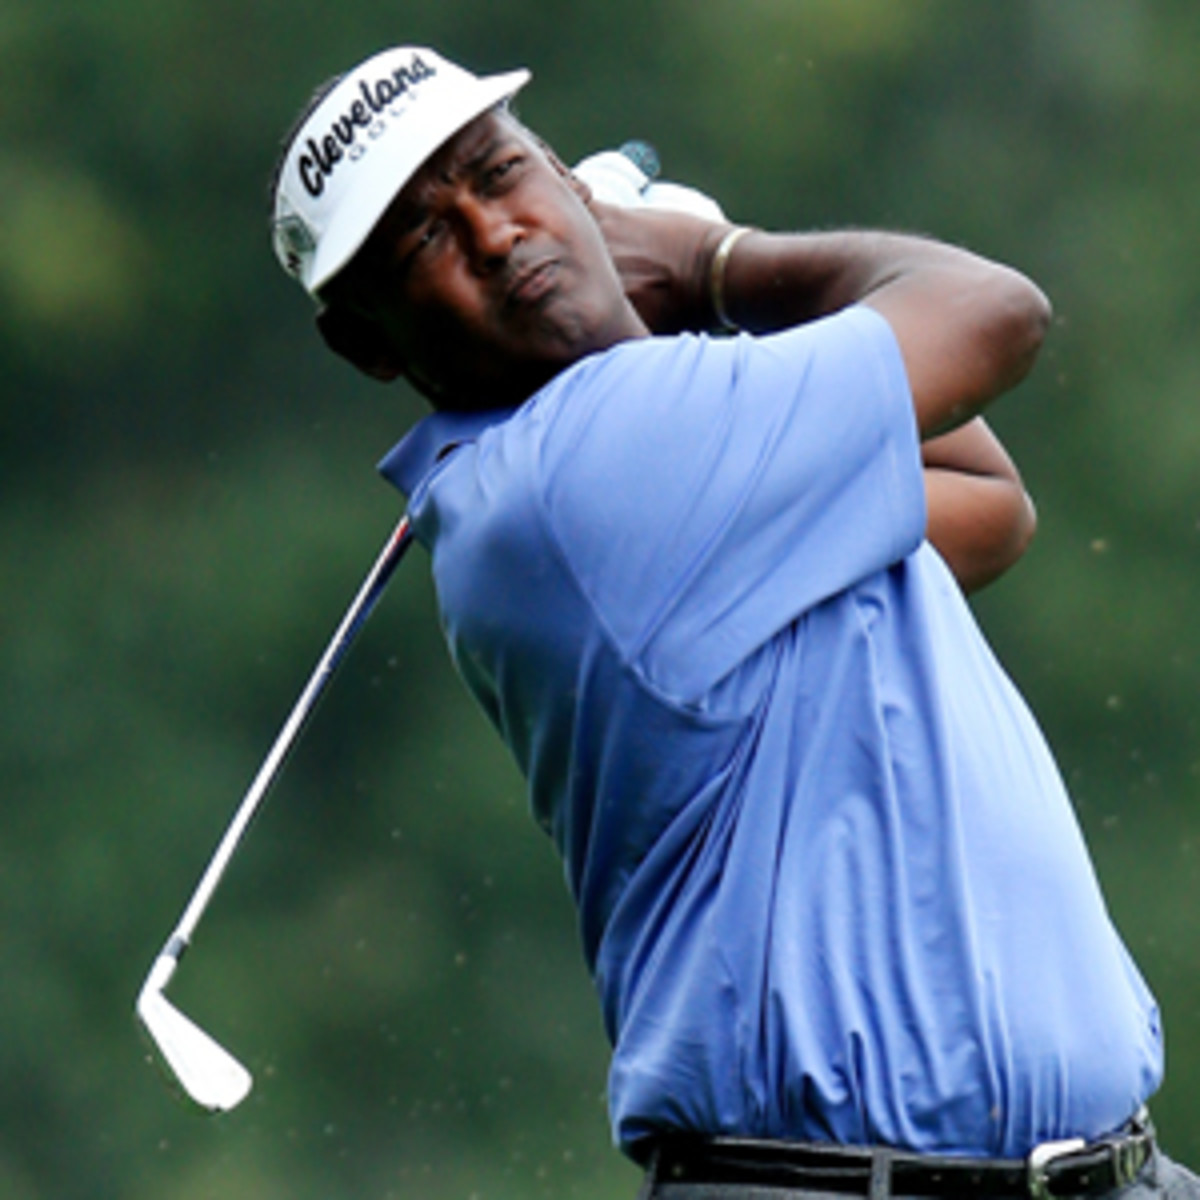 Vijay Singh revealed in a Sports Illustrated article he had used deer antler spray. (David Cannon/Getty Images)